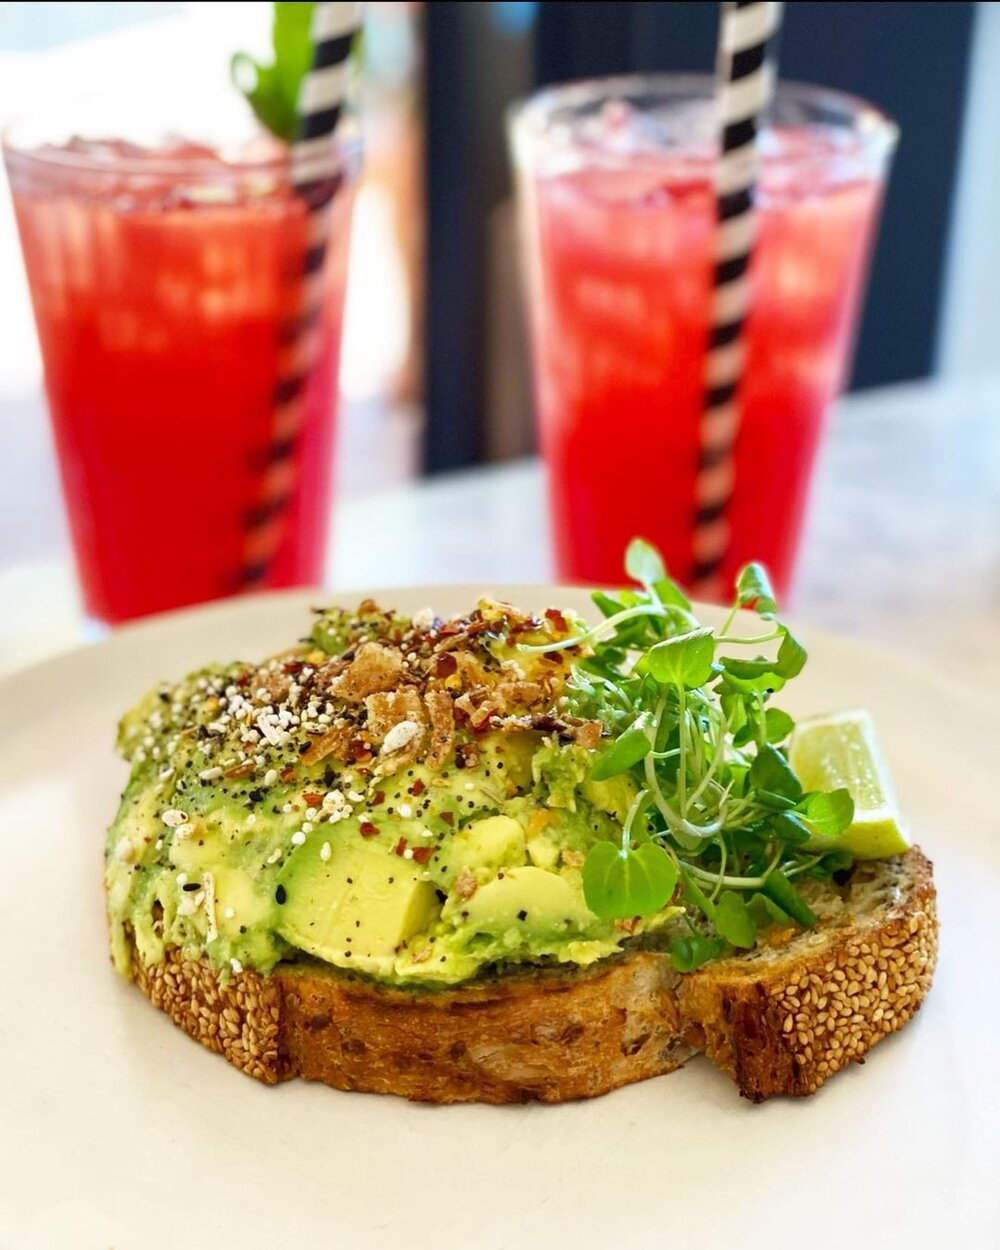  Tarte Bakery &amp; Cafe Gold Coast. This guide to the best cafes in Gold Coast Australia includes the best breakfast spots in Gold Coast and the best vegan cafes in Gold Coast. Find the best cafes in Burleigh Head, Palm Beach, and more of the best p